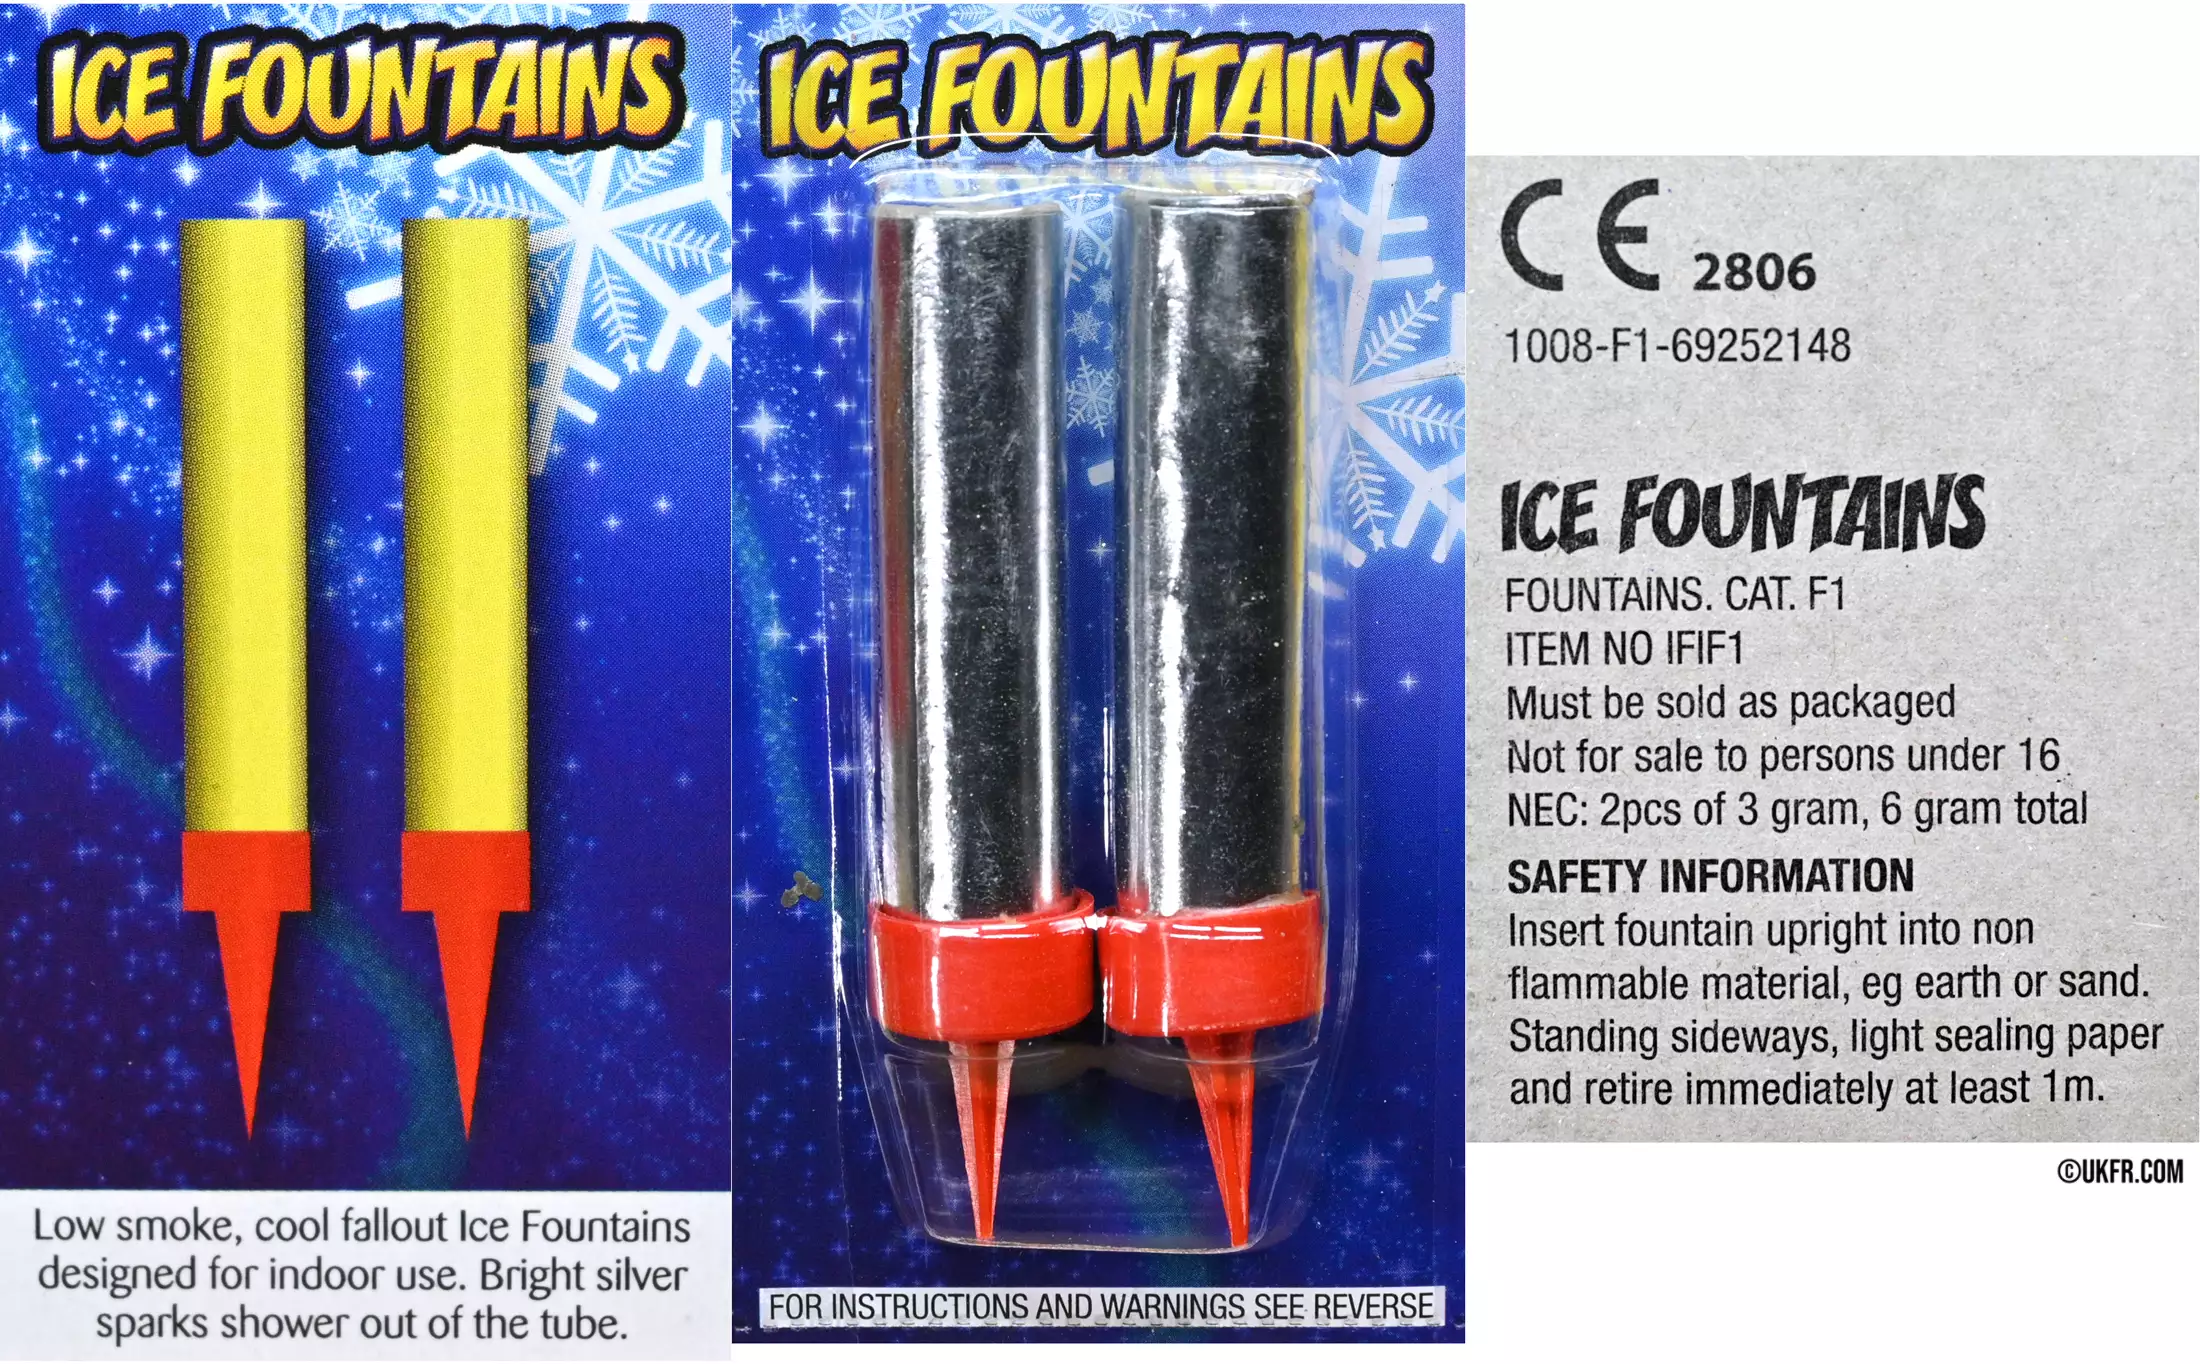 Ice Fountains Indoor Fireworks pack